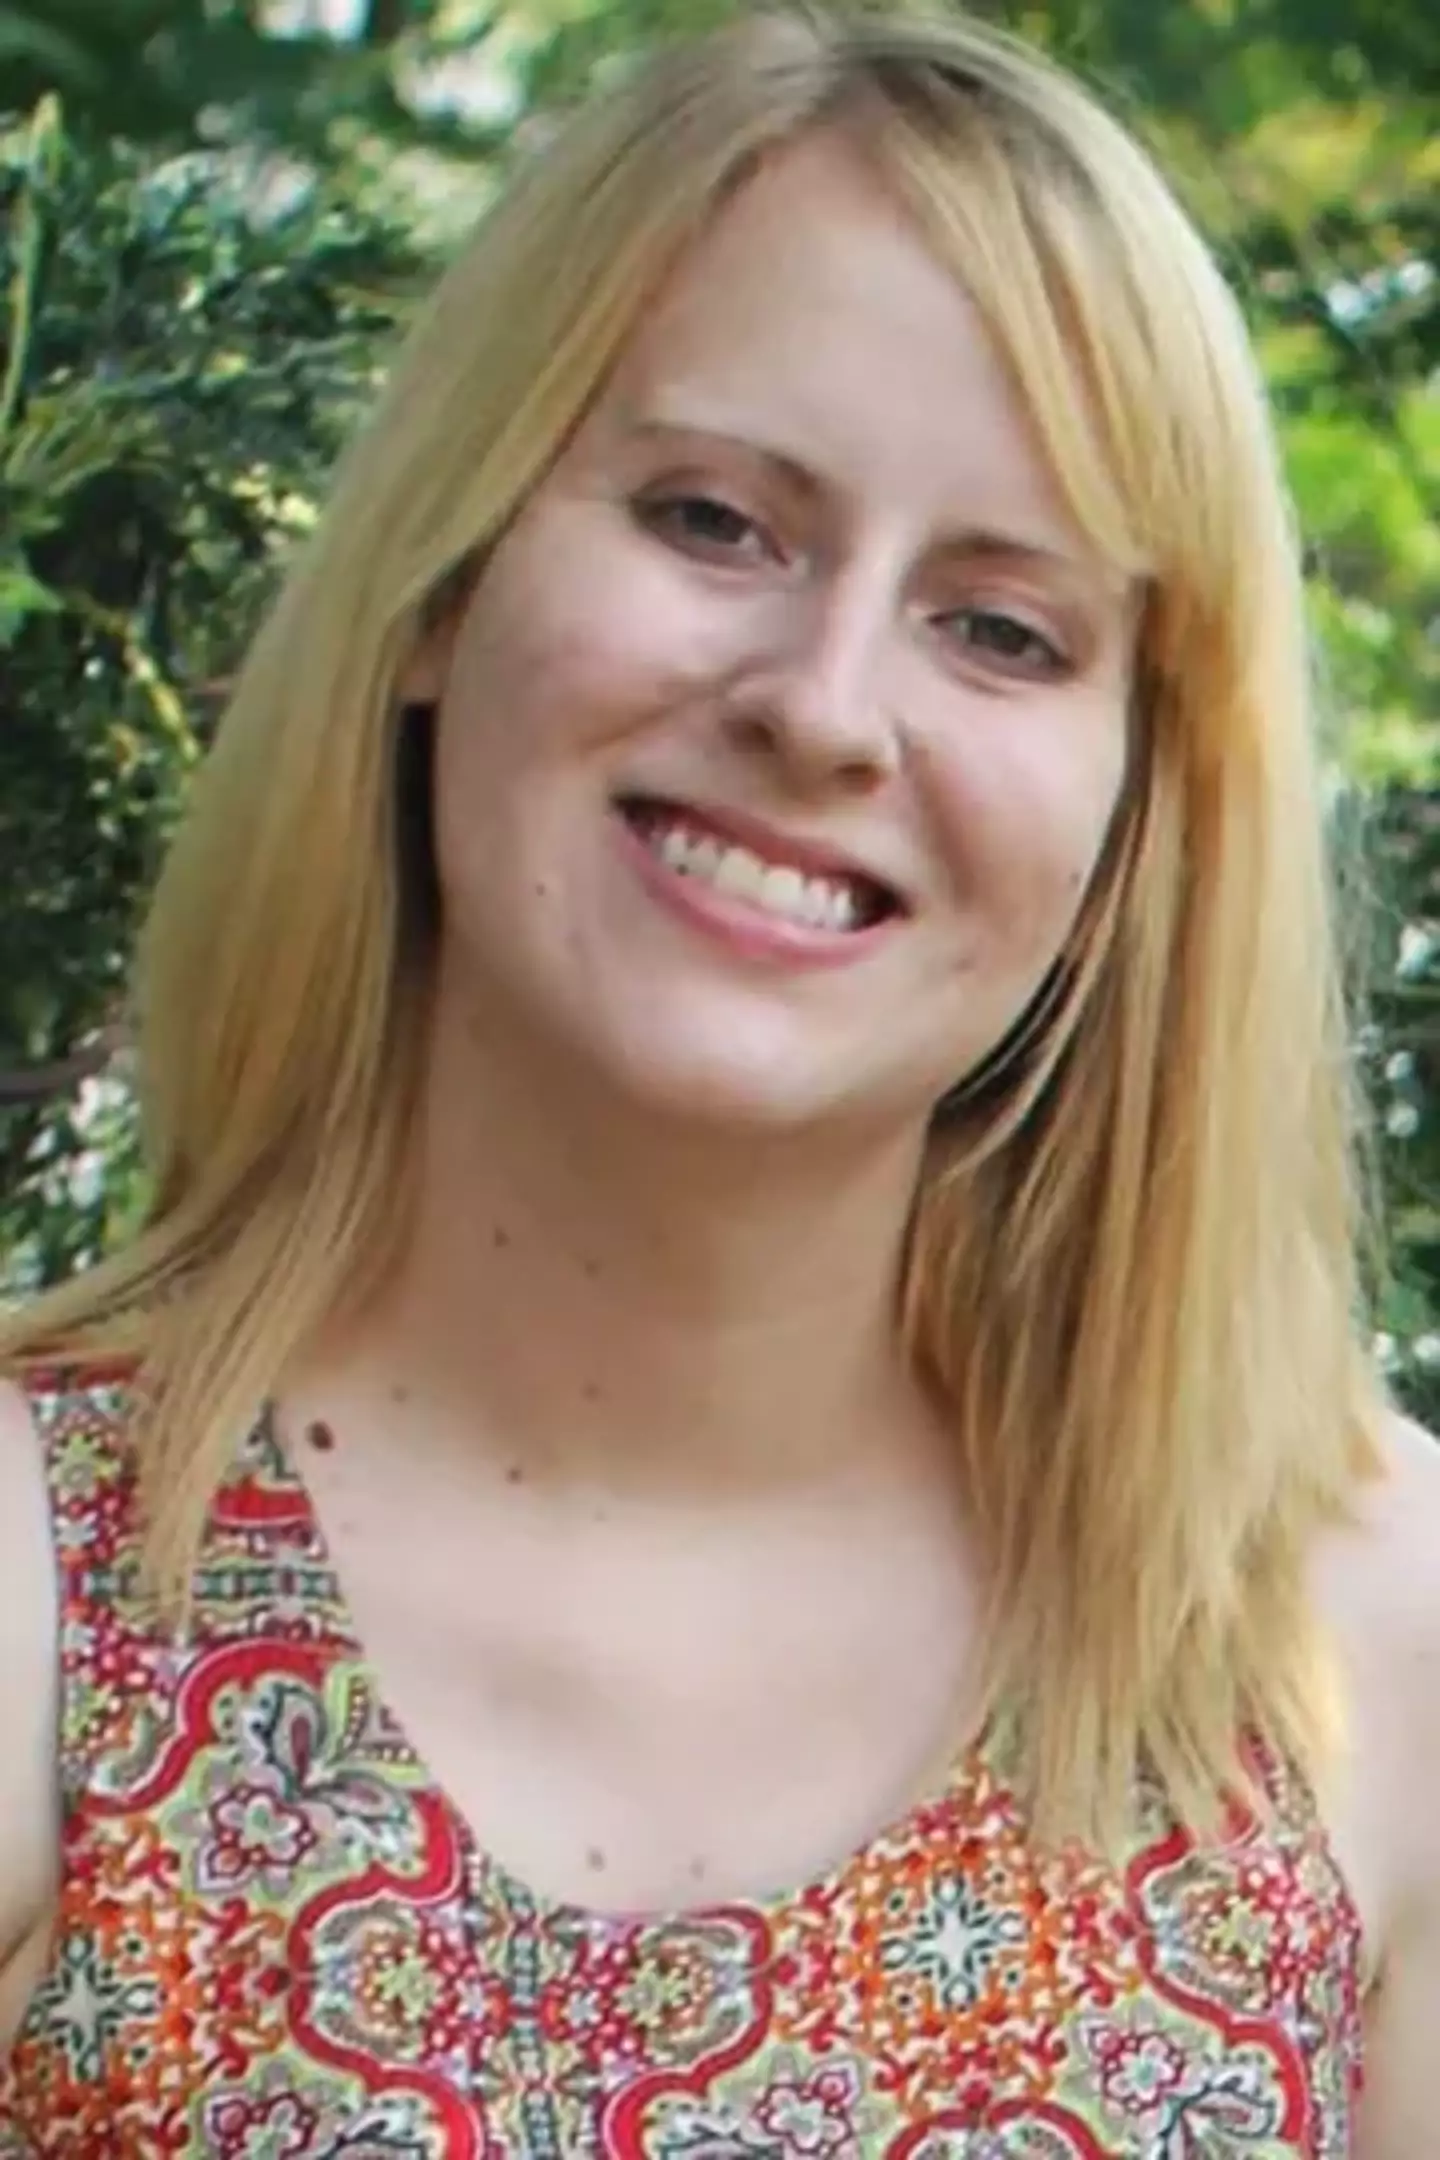 Chelsea Bruck disappeared in 2014.